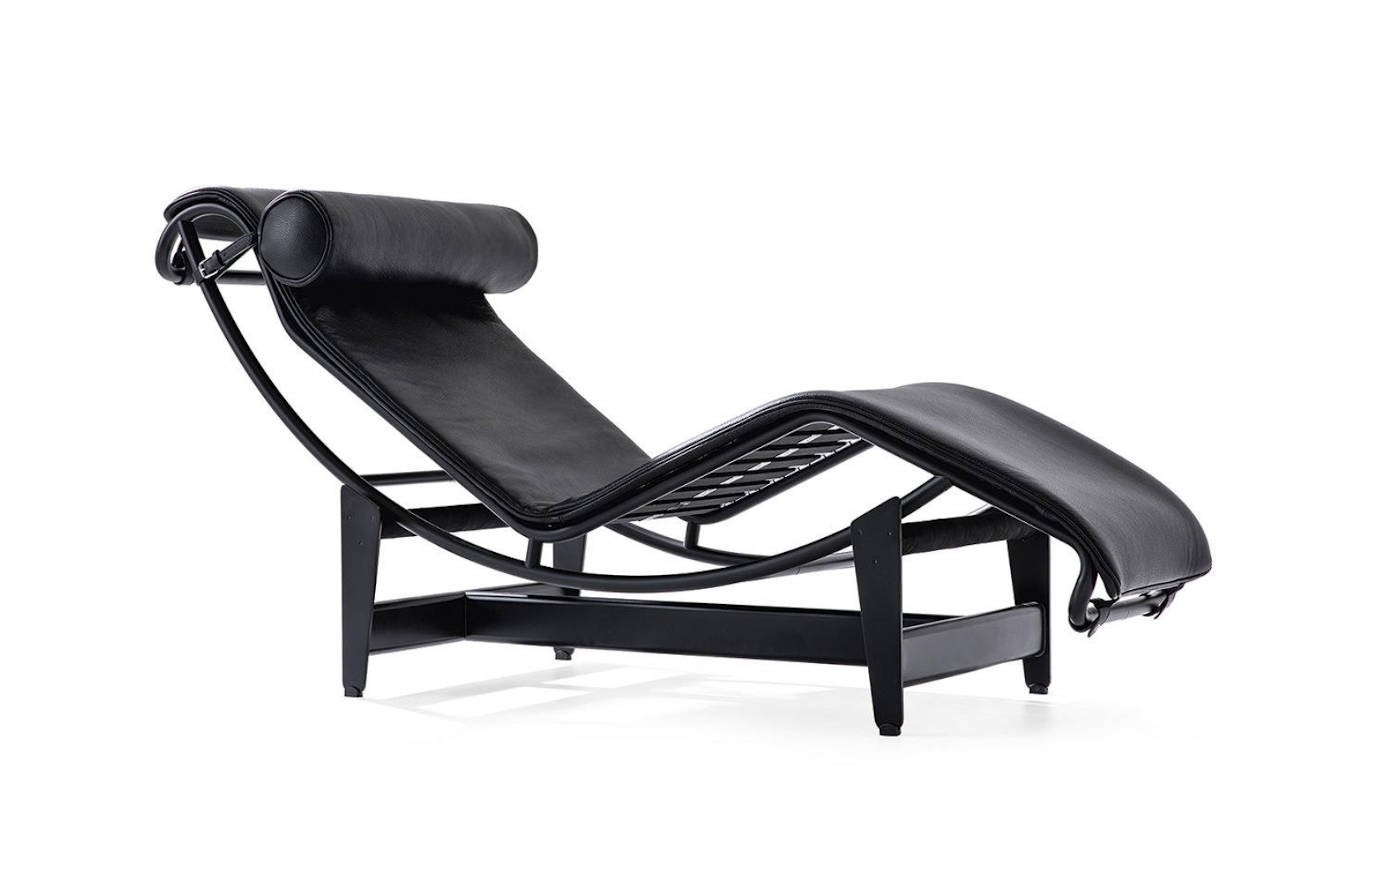 Cassina Tokyo Chaise Lounge by Charlotte Perriand